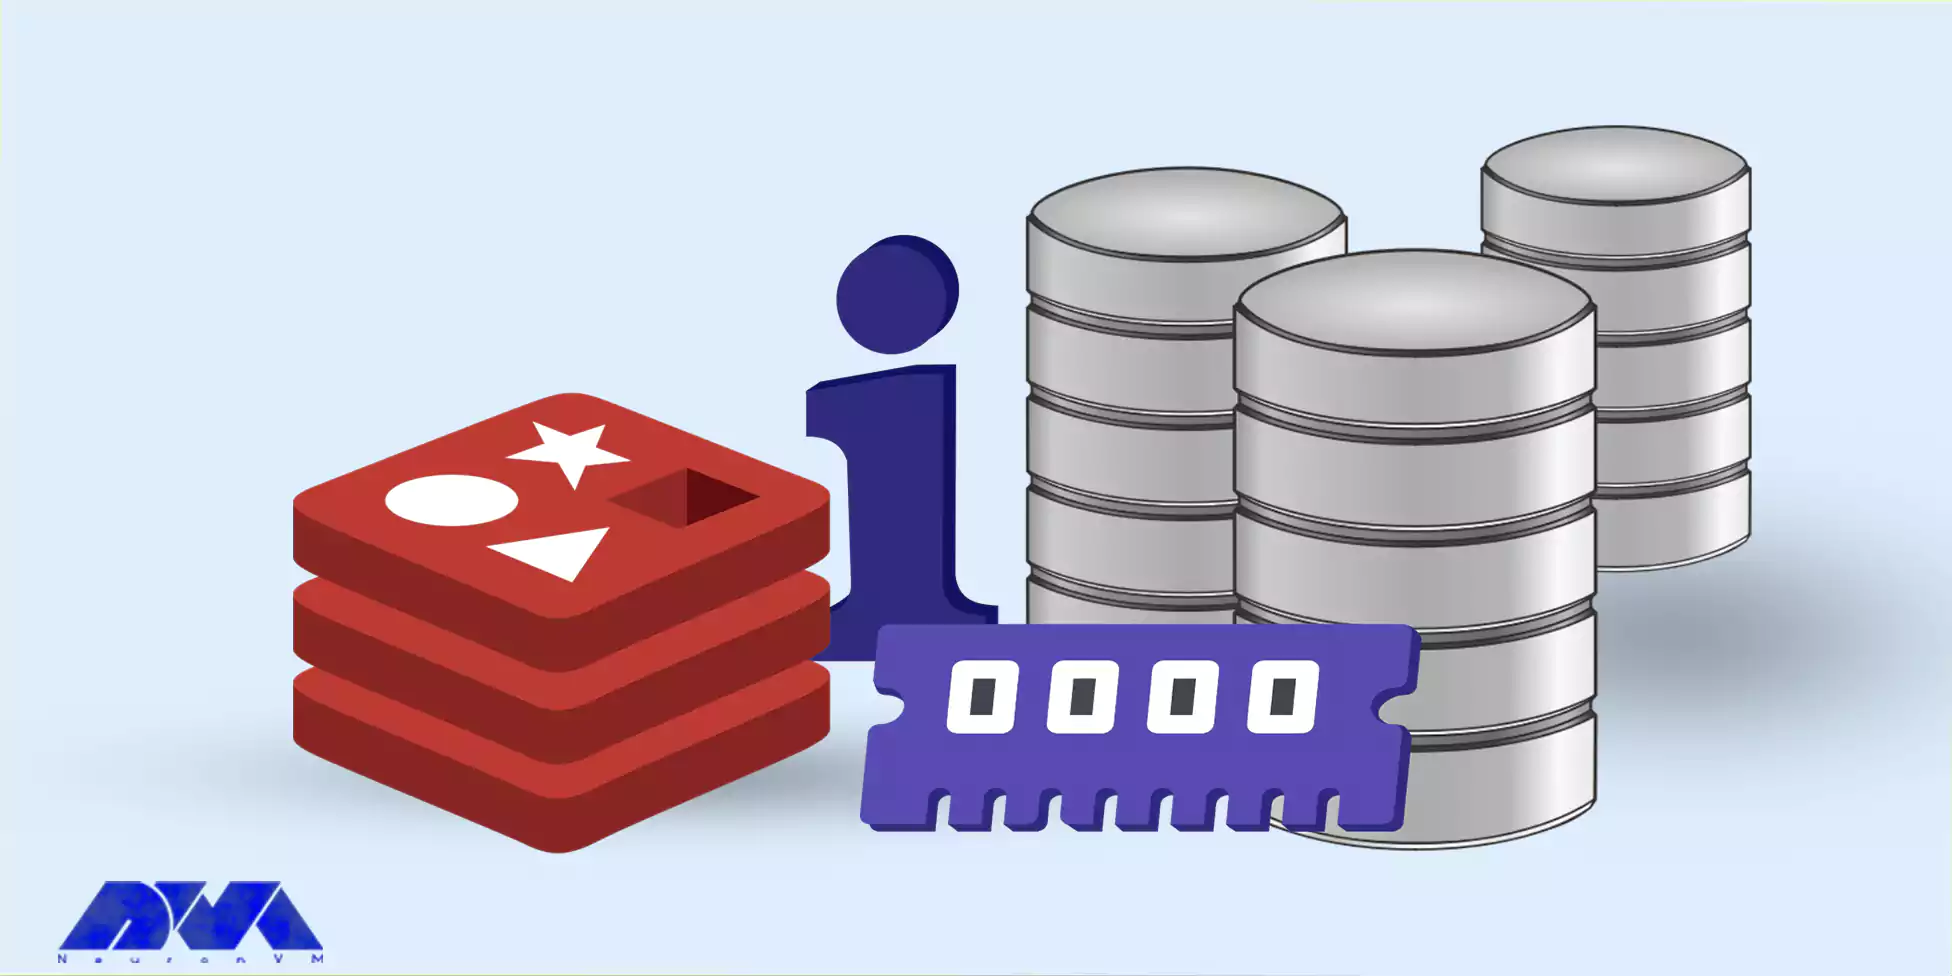 What is Redis